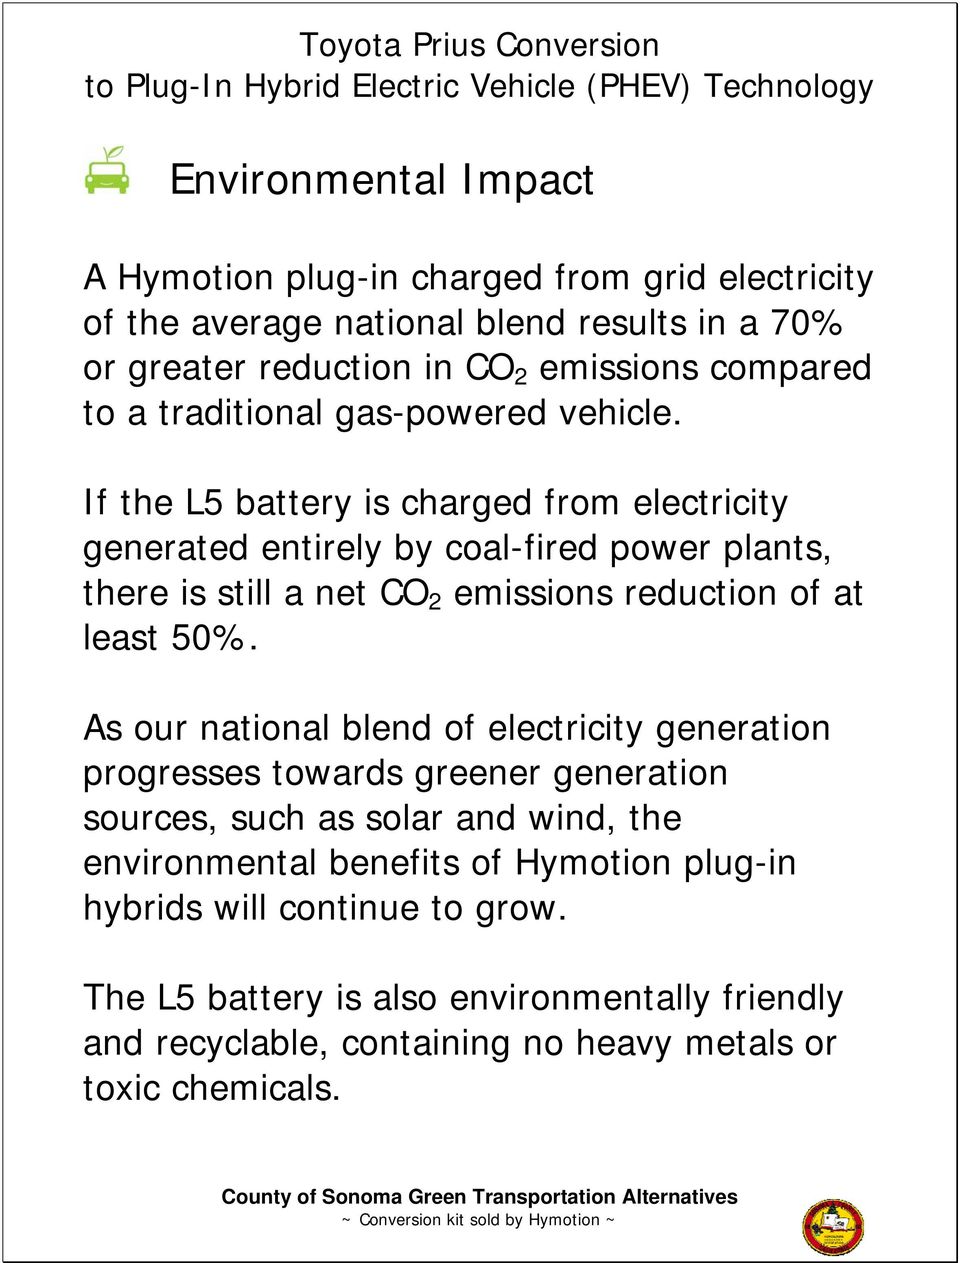 If the L5 battery is charged from electricity generated entirely by coal-fired power plants, there is still a net CO 2 emissions reduction of at least 50%.